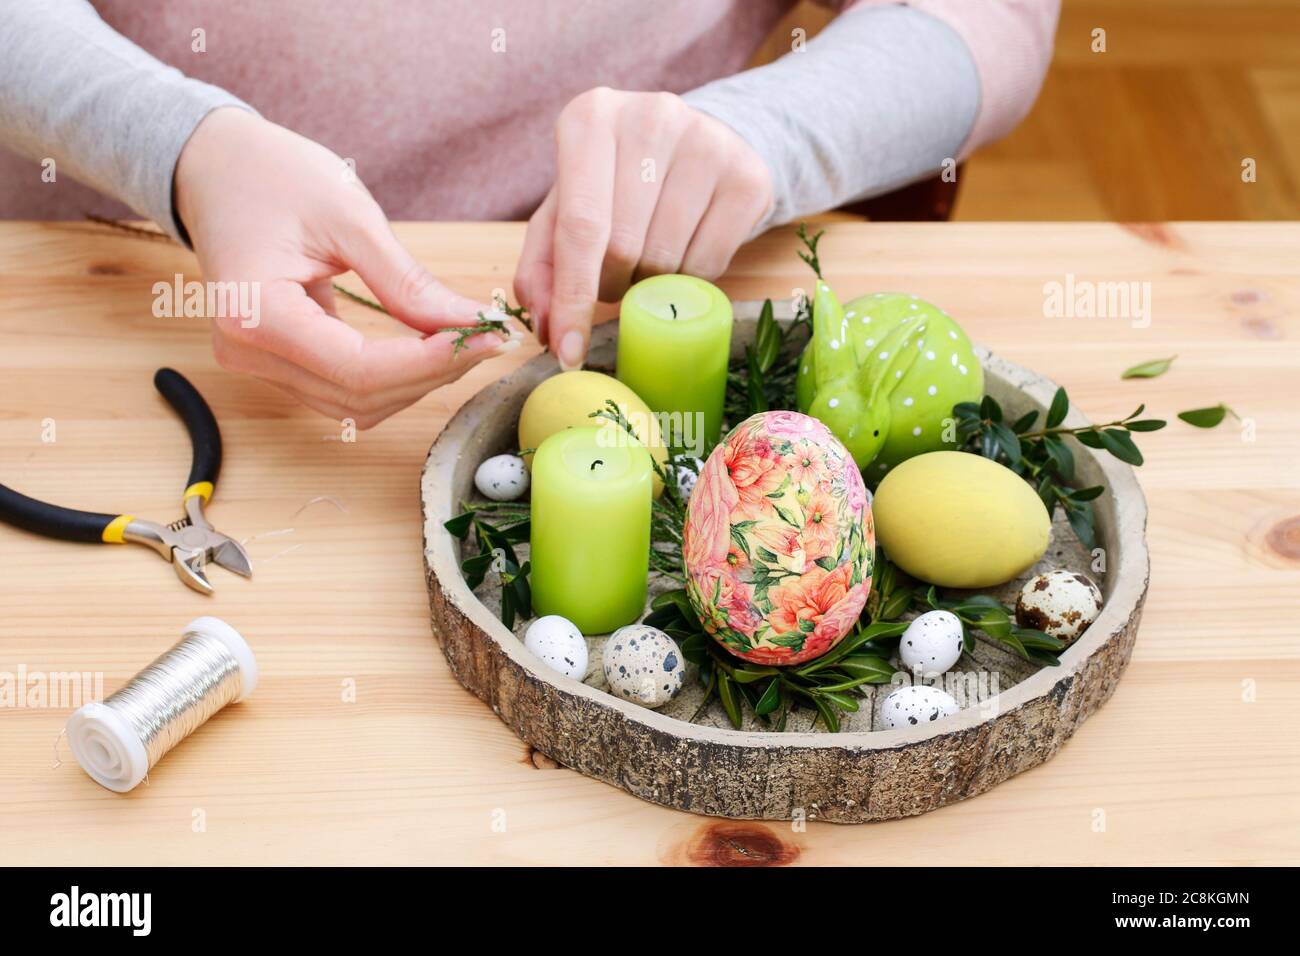 Florist at work: woman arranges an Easter table decoration with eggs, candles and ceramic figurines. Step by step, tutorial. Stock Photo